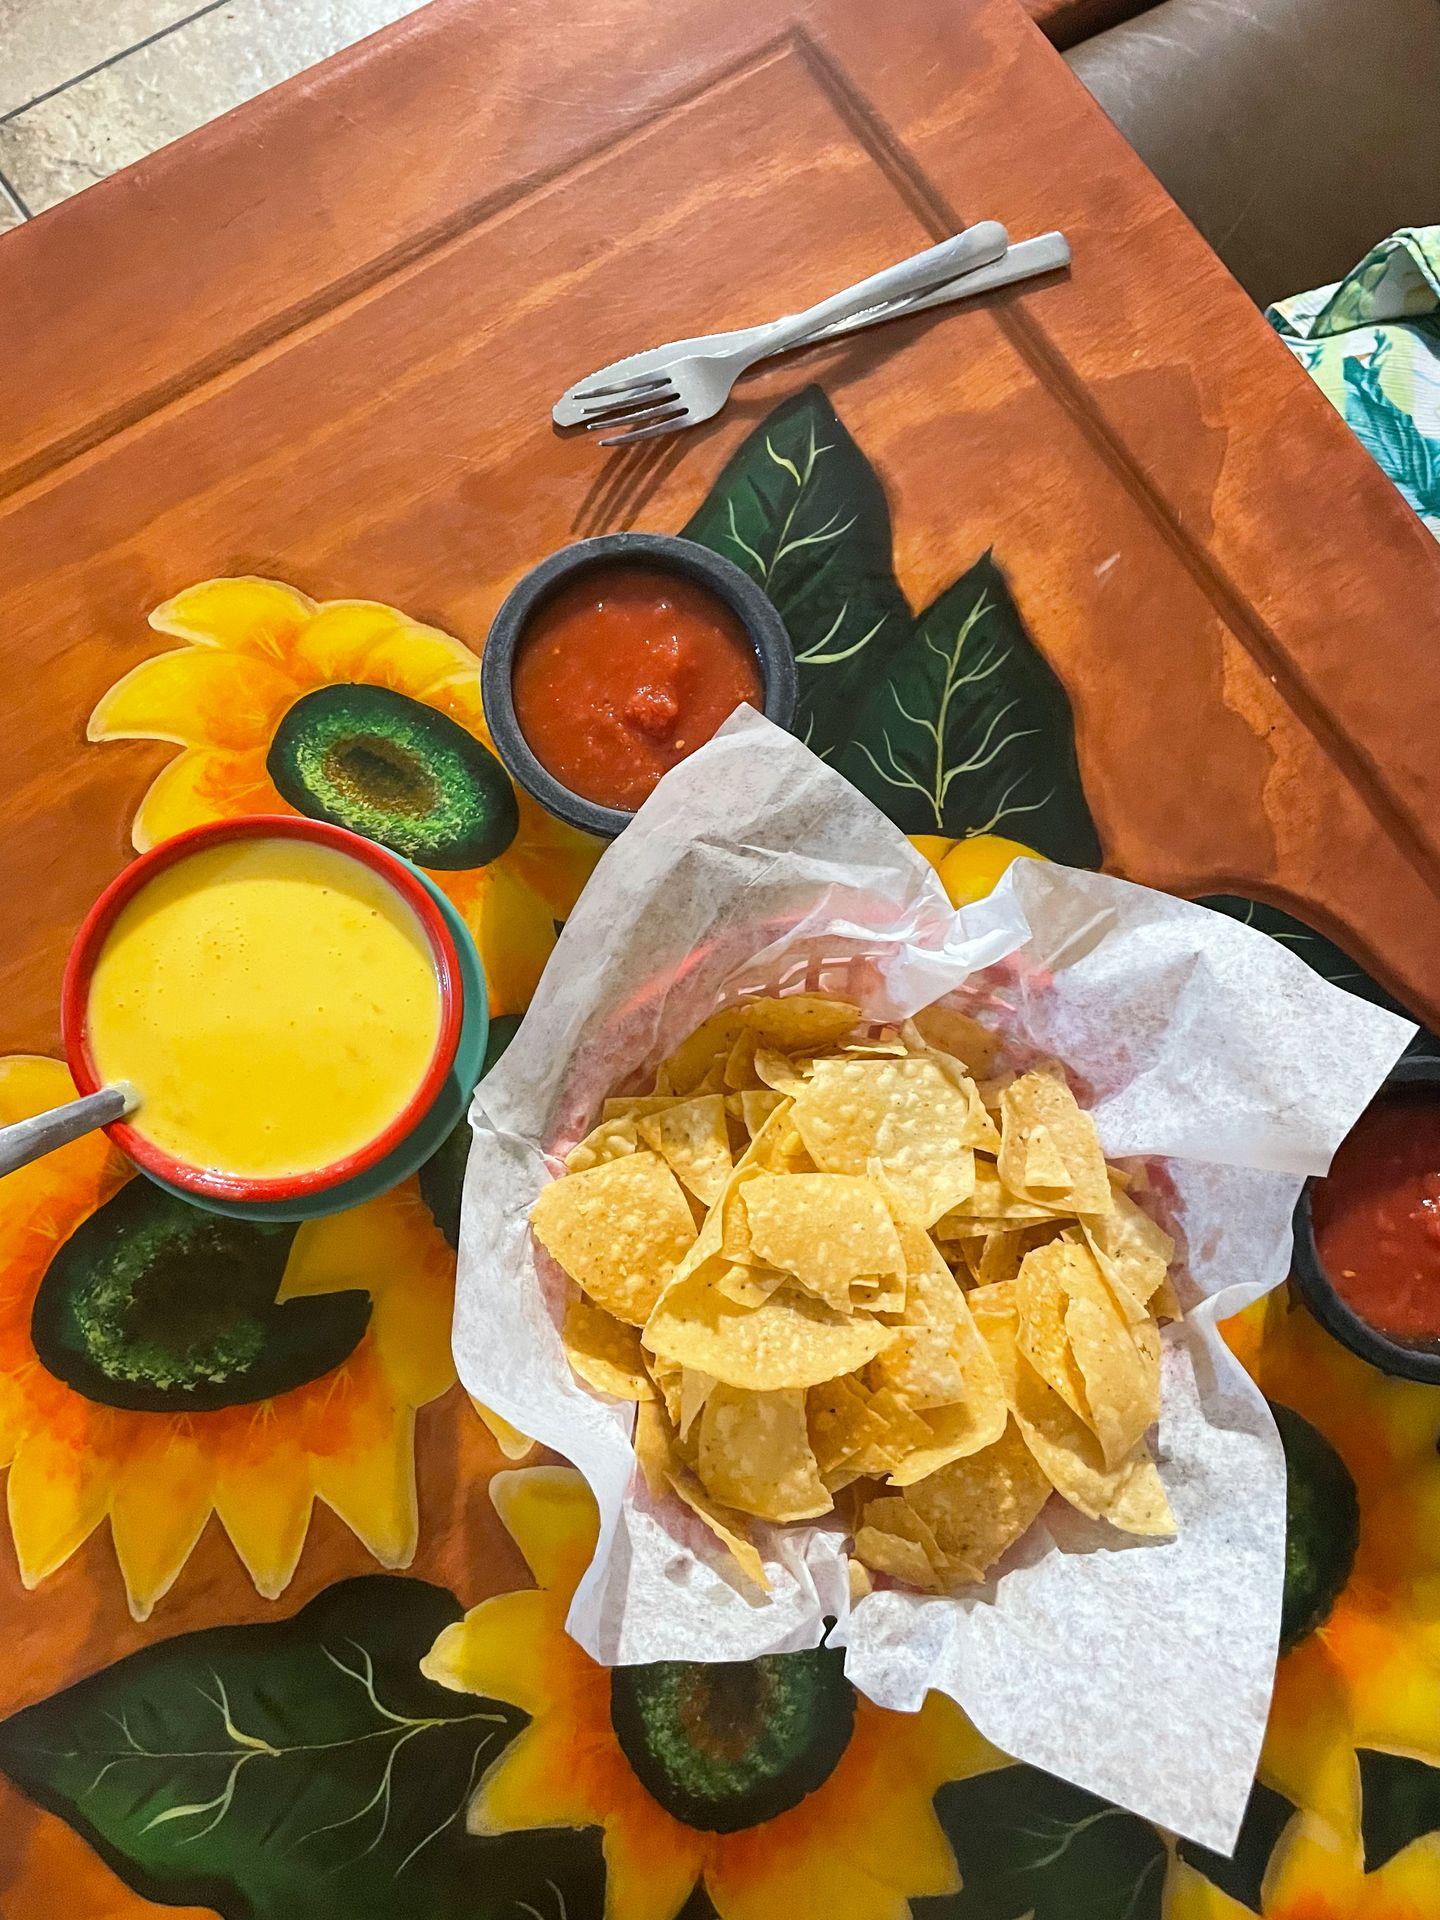 A bowl of chips next to salsa and queso sitting on a colorful table.